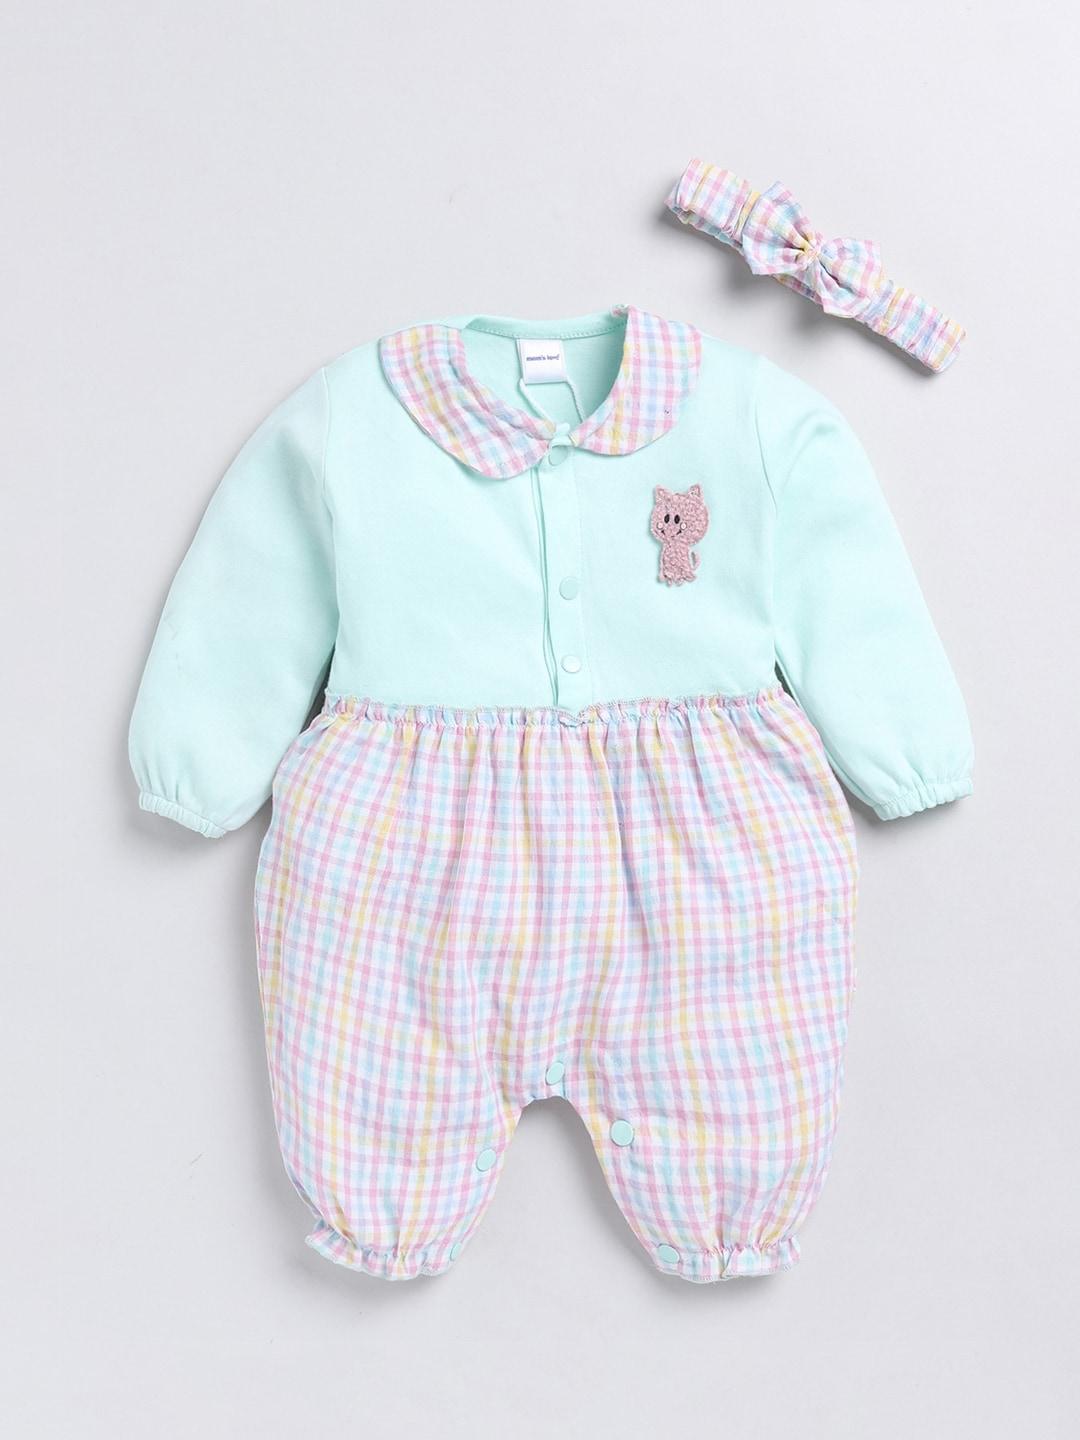 moms-love-infant-girls-striped-cotton-rompers-with-hair-band